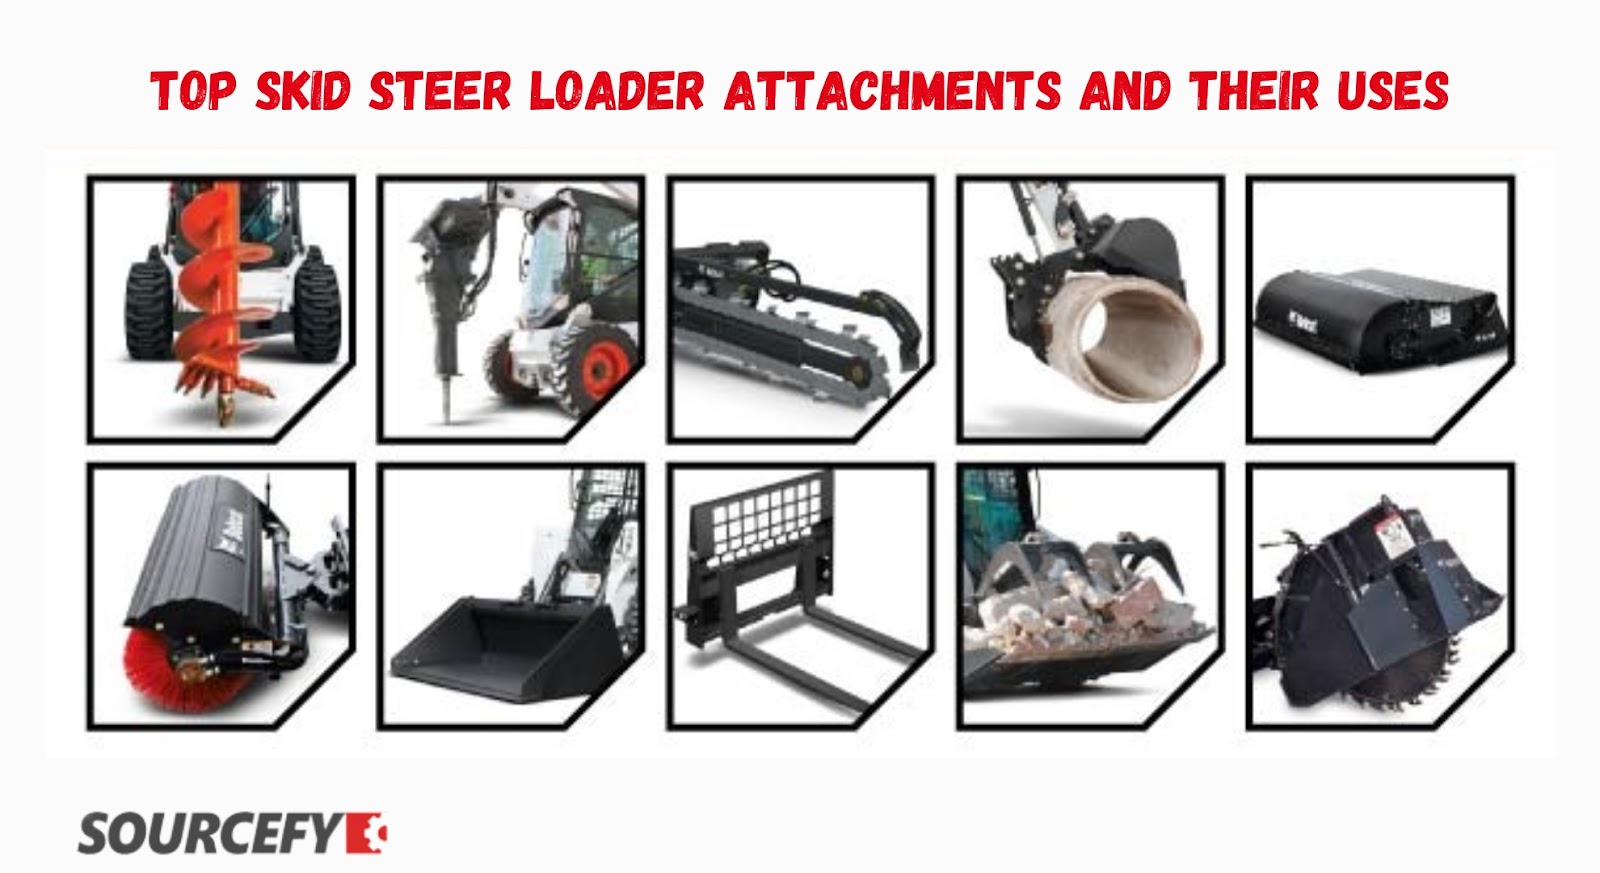 Top Skid Steer Loader Attachments and Their Uses